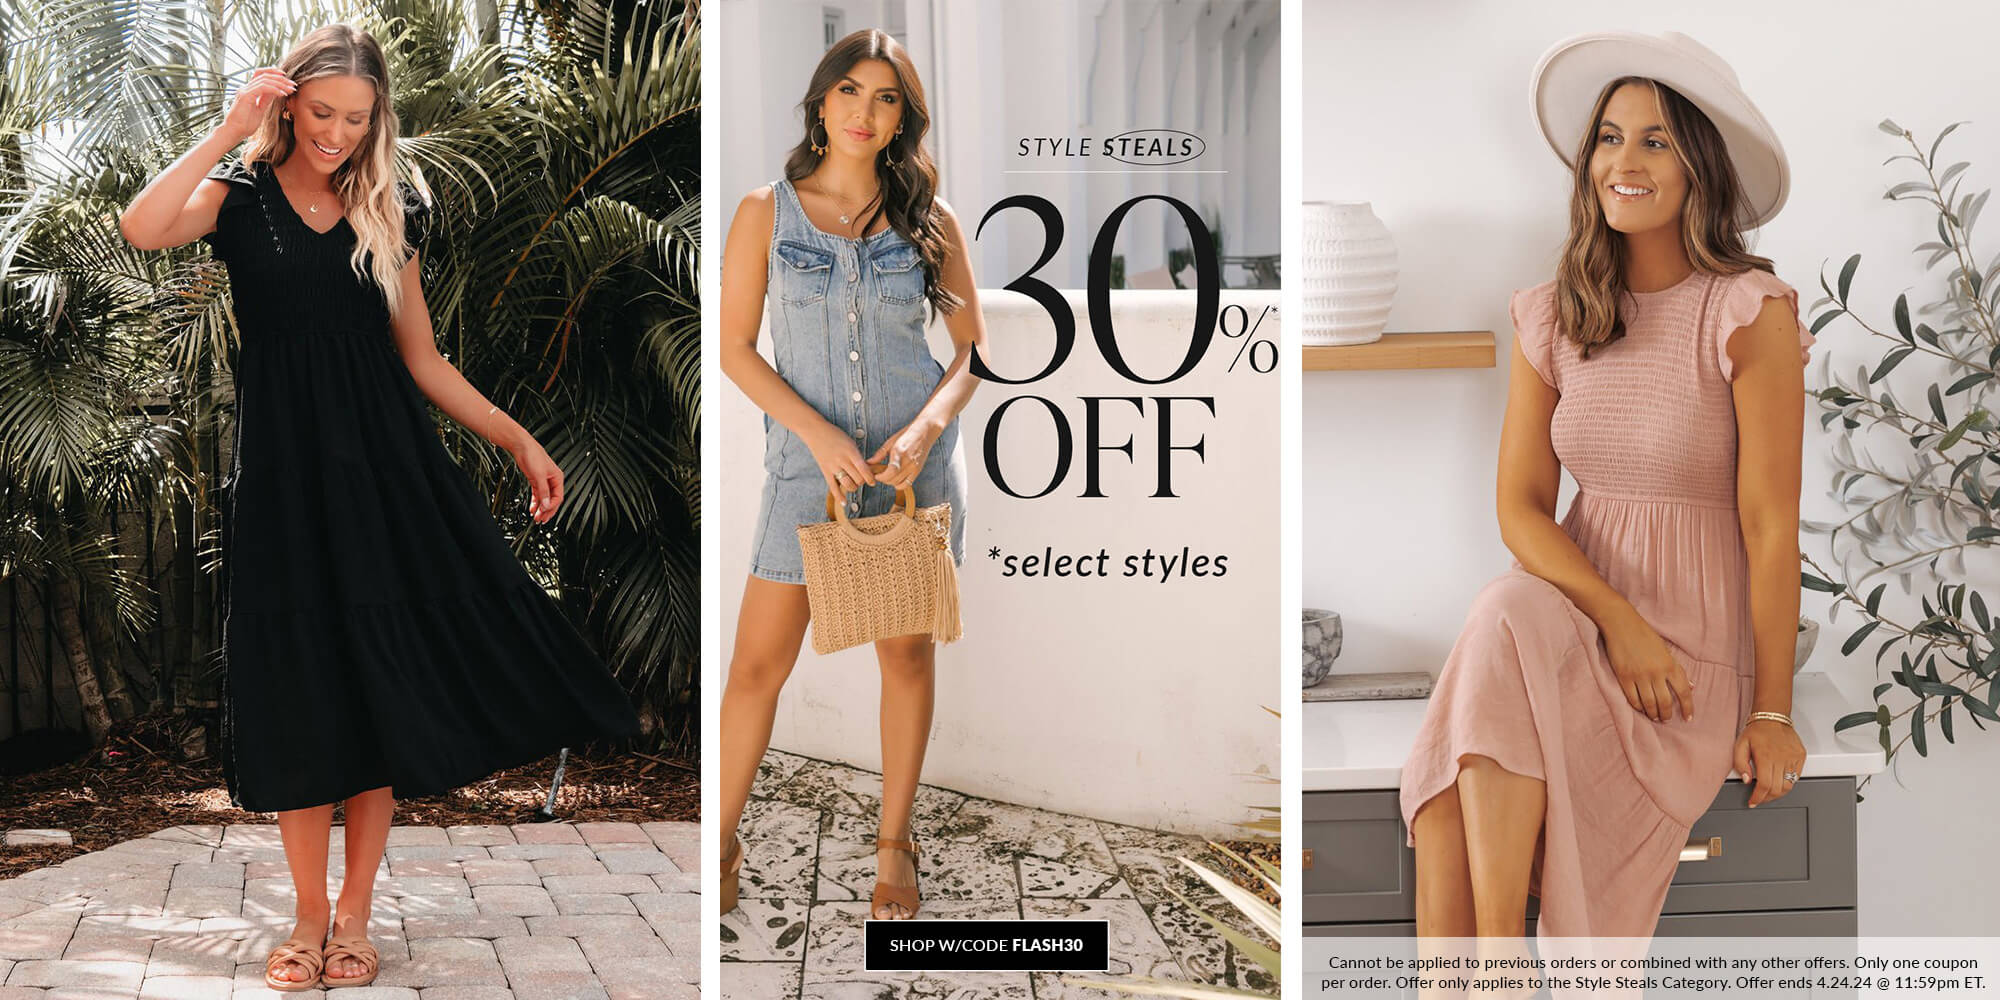 style steals 30% off select styles shop with code FLASH30. Cannot be applied to previous orders or combined with any other offers. Only one coupon per order. Offer only applies to the Style Steals Category. Offer ends 4.24.24 @ 11:59pm ET.